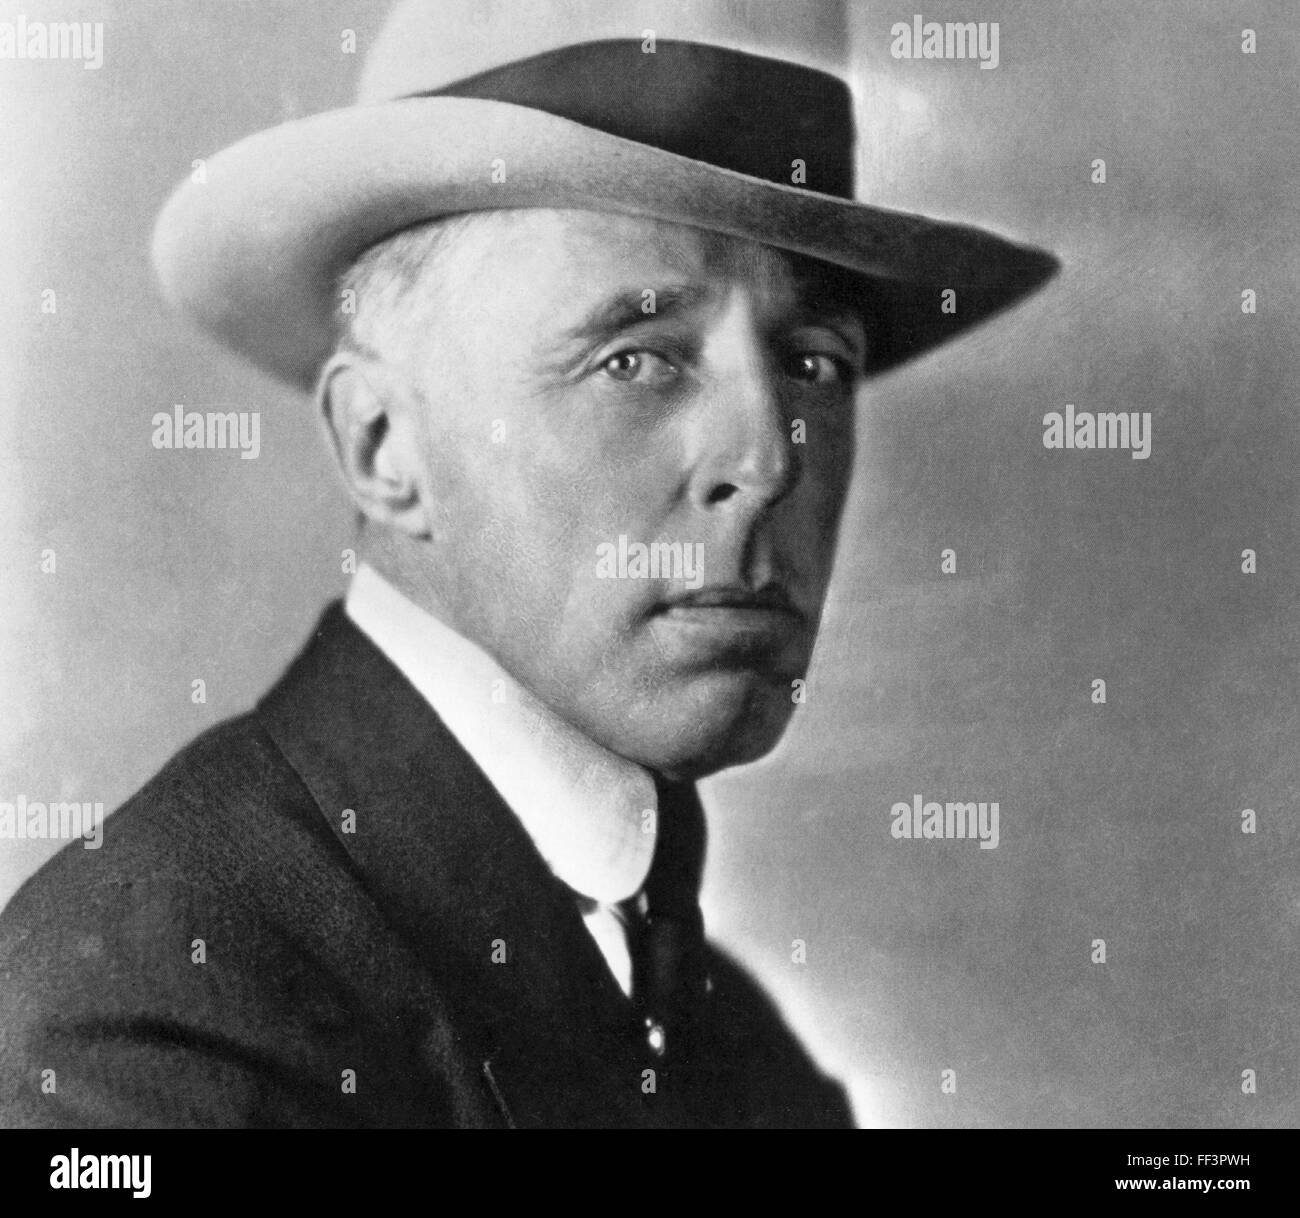 D.W.GRIFFITH (1875-1948) American film director about 1930 Stock Photo